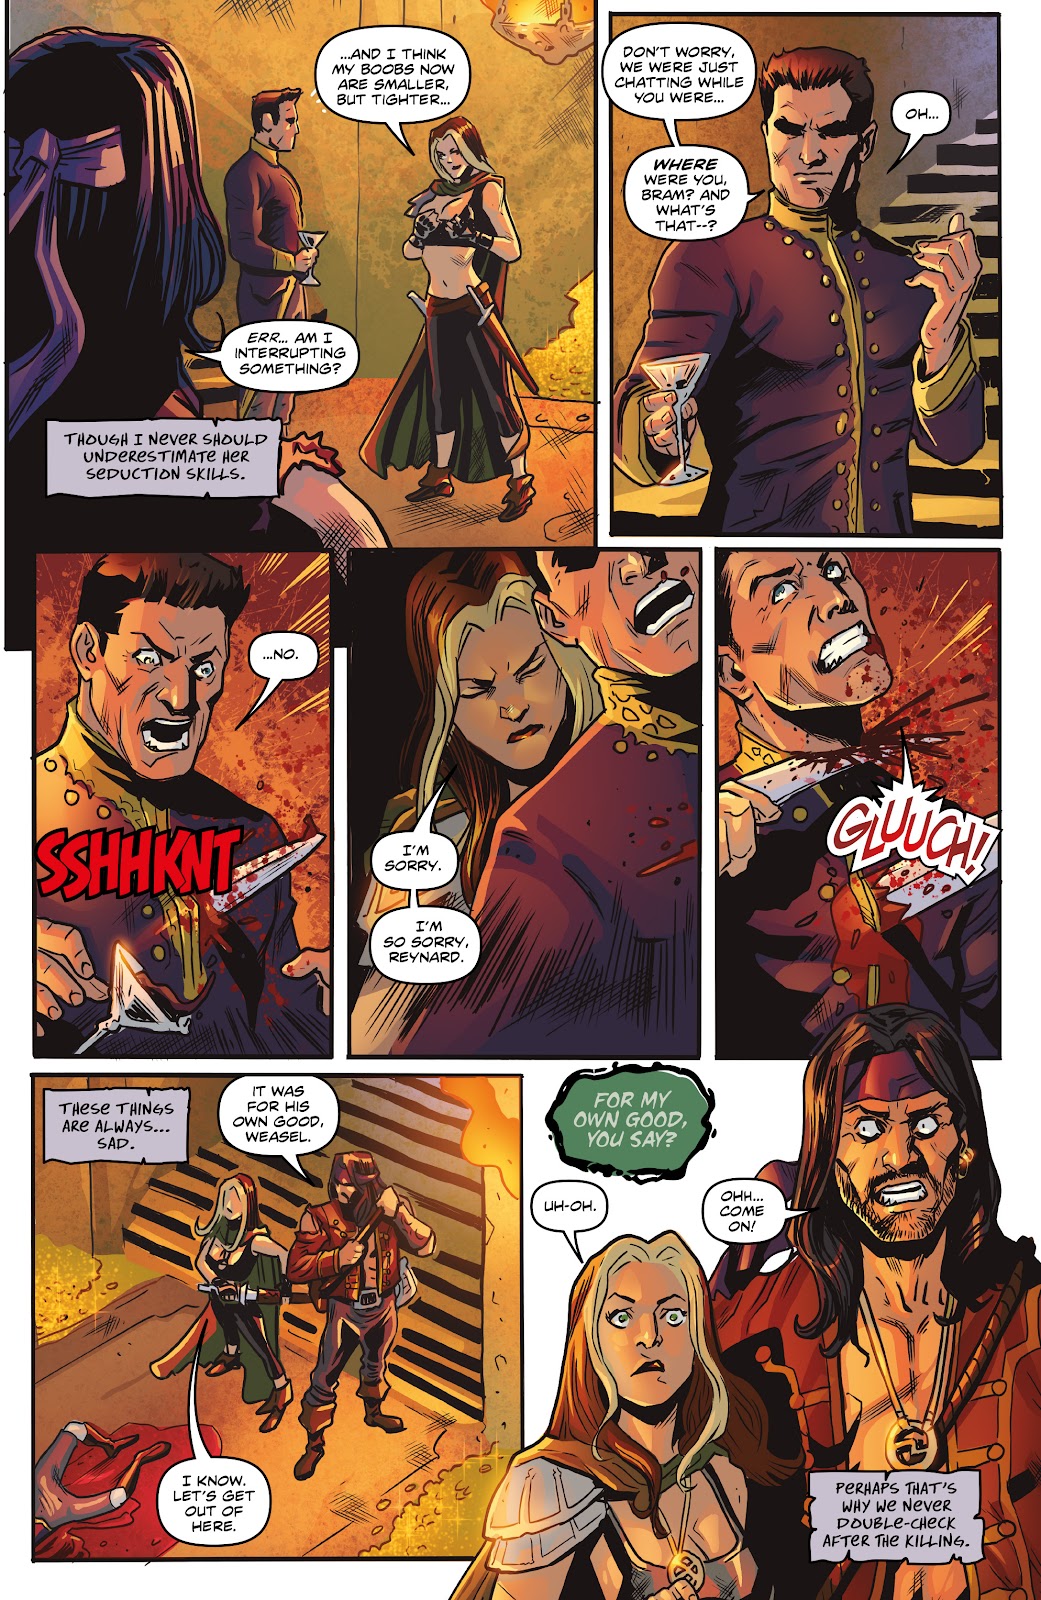 Rogues!: The Burning Heart issue 5 - Page 17